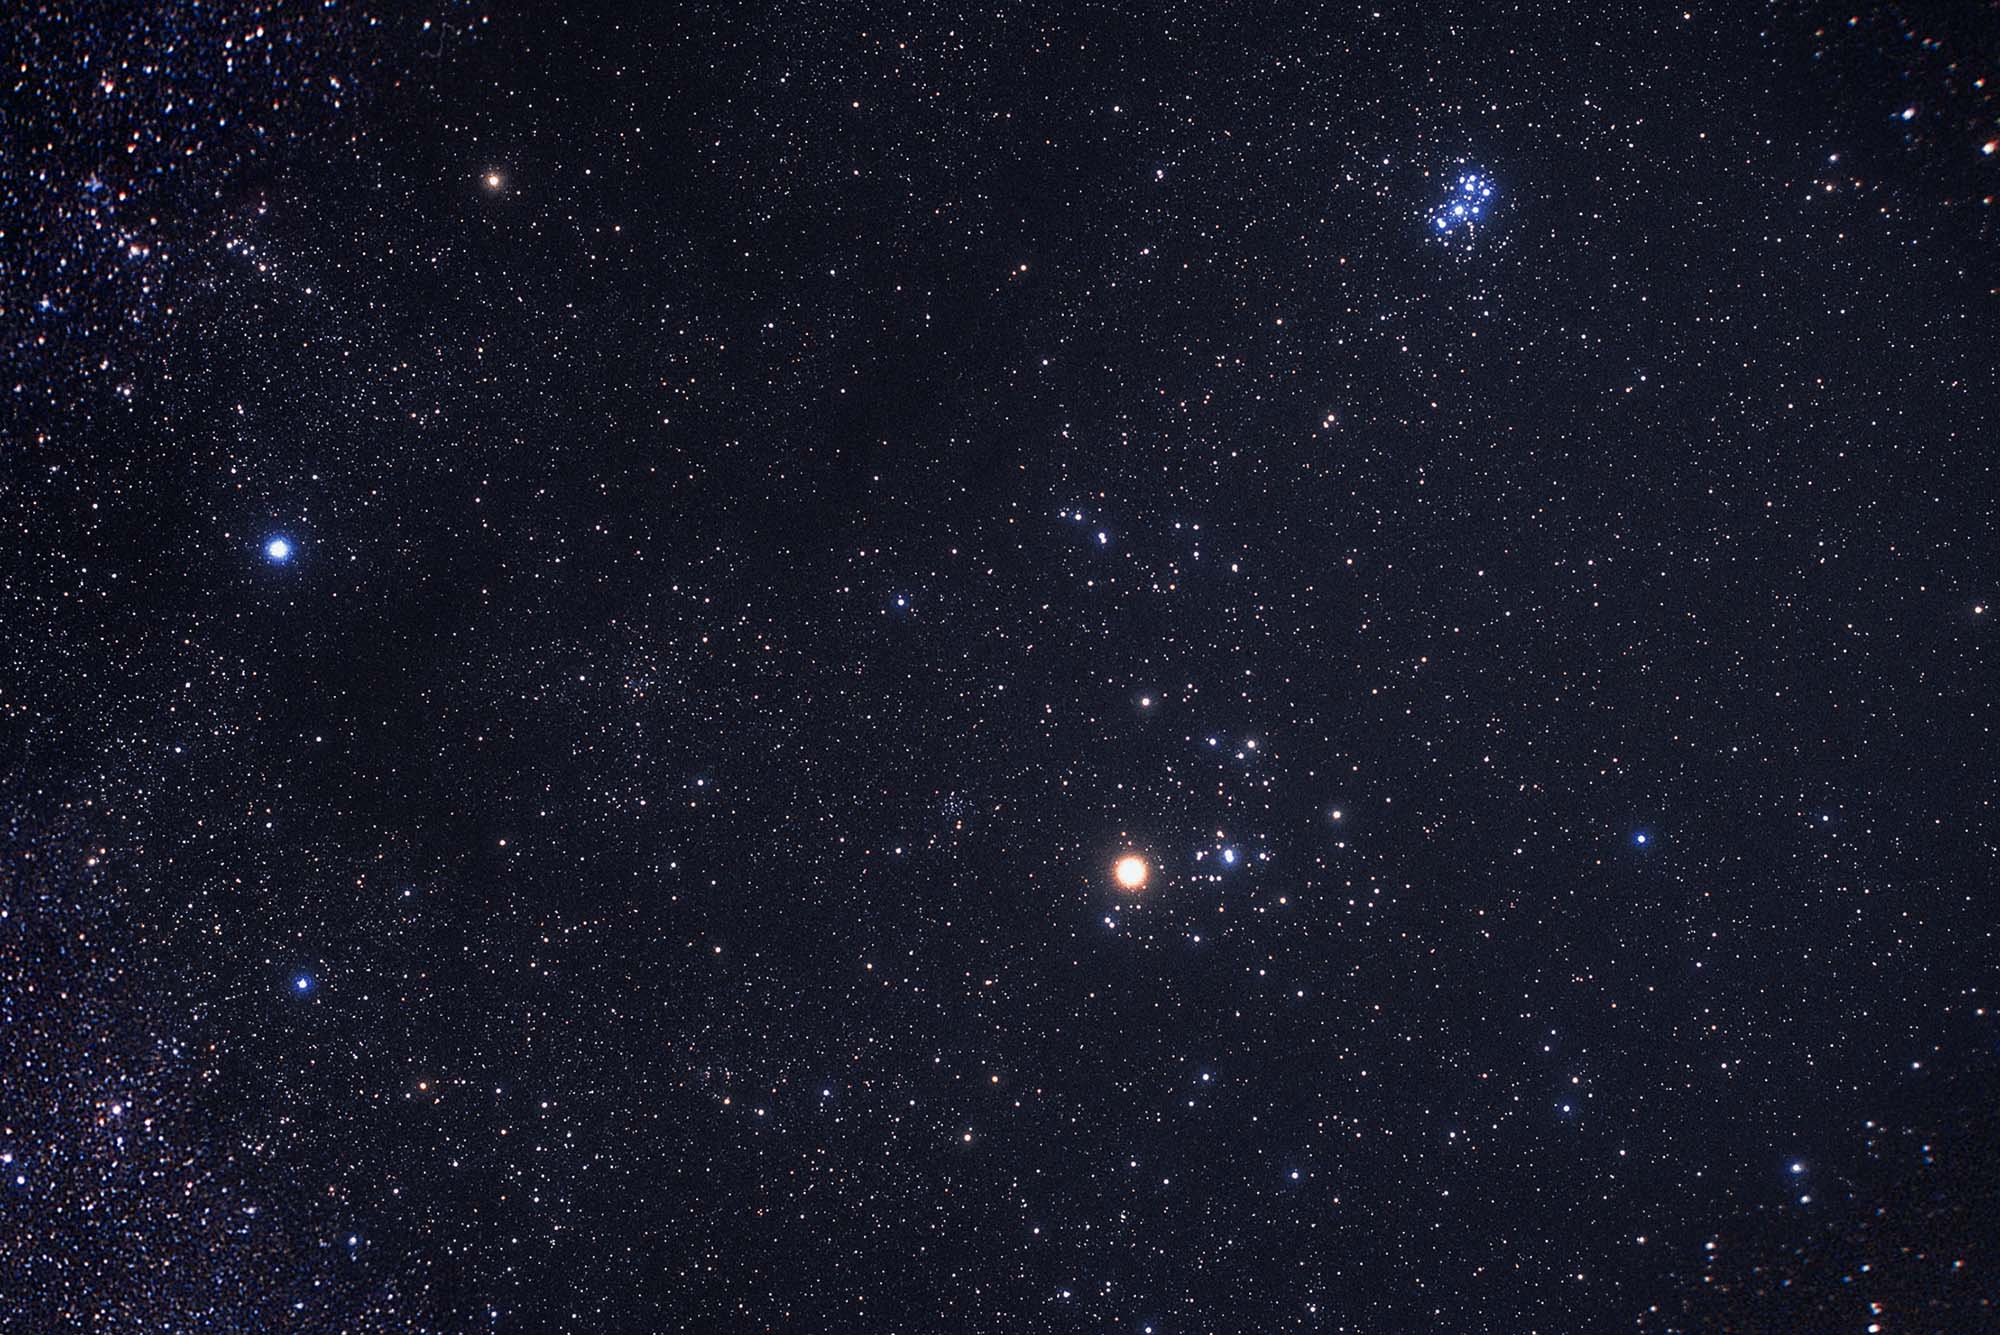 Photograph of the constellation Taurus made by the avid astrophotographer Akira Fujii. In the photo, tiny white dots, stars, fill the image, with a brighter, reddish dot towards the bottom right, which is Taurus.